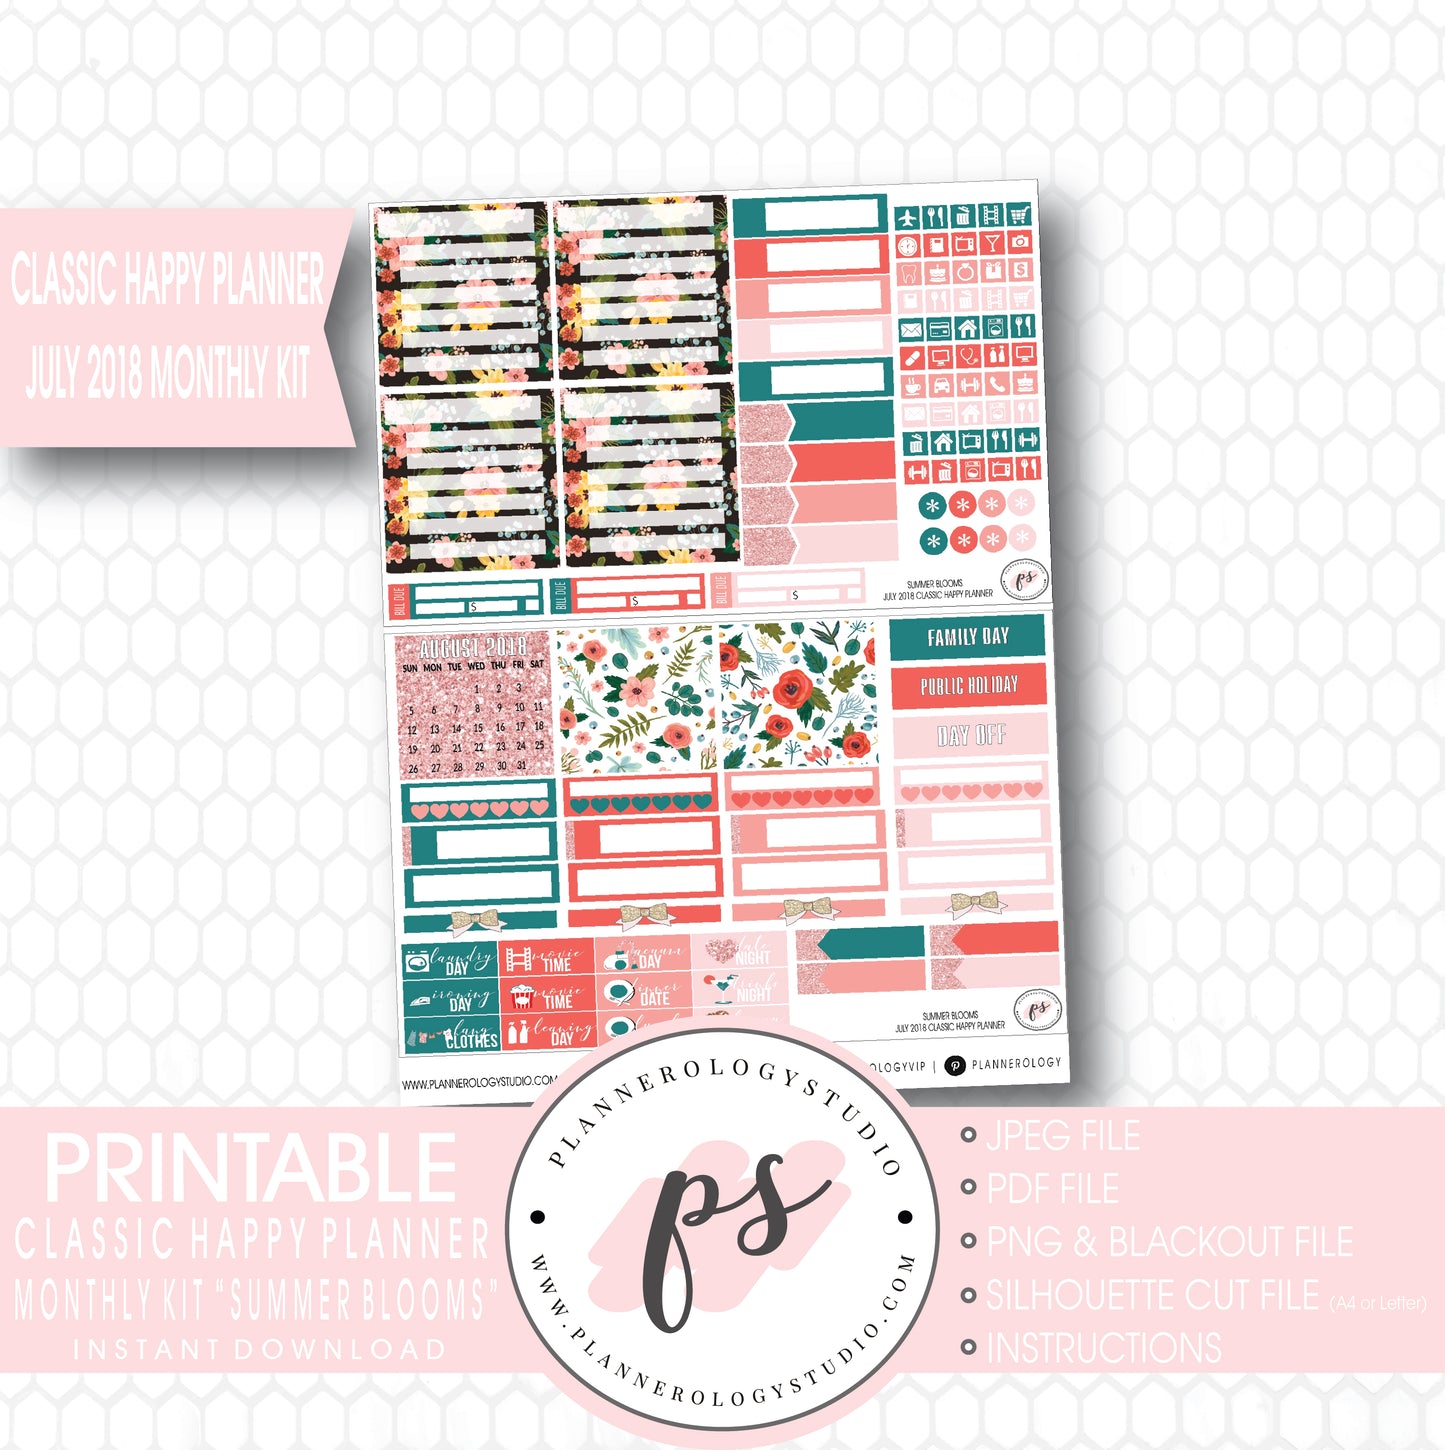 Summer Blooms July 2018 Monthly View Kit Digital Printable Planner Stickers (for use with Classic Happy Planner) - Plannerologystudio